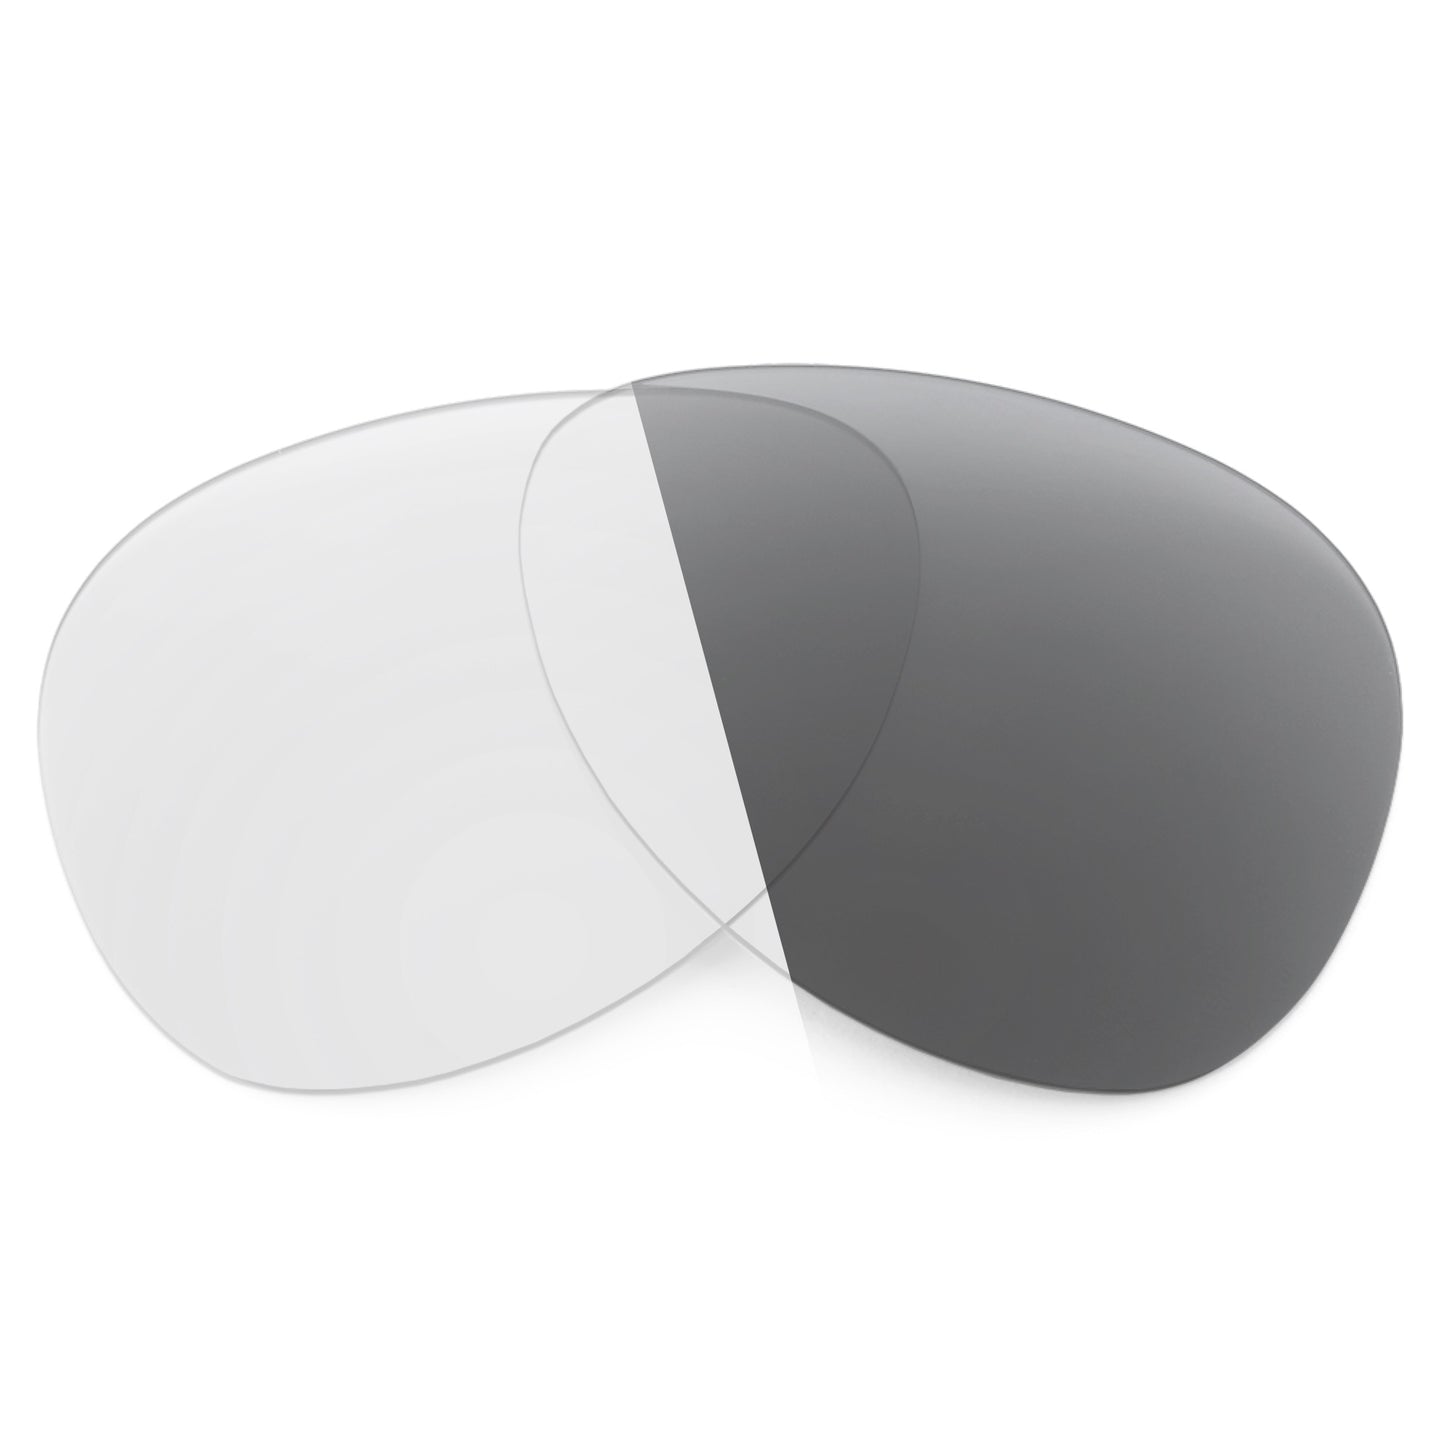 Revant replacement lenses for Ray-Ban RB3457 59mm Non-Polarized Adapt Gray Photochromic